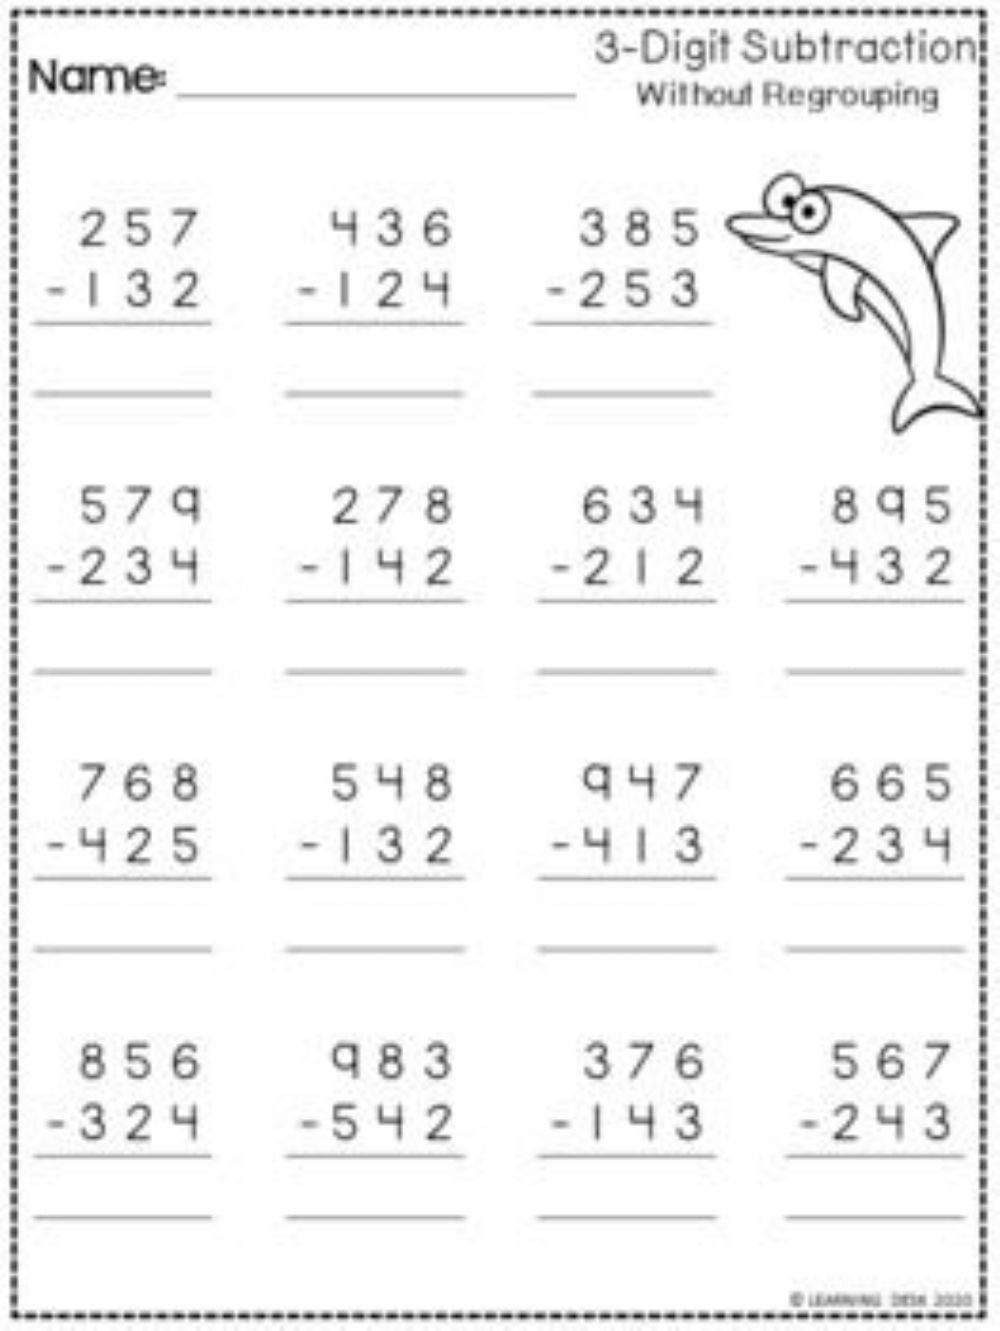 3- digit subtraction without regrouping worksheet